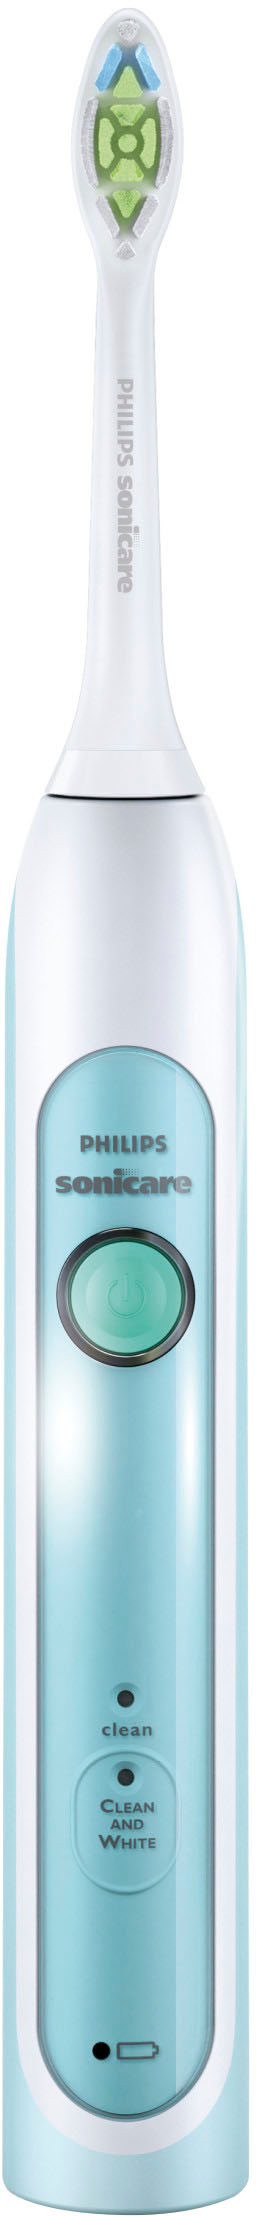 Philips Sonicare HX6712/66 HealthyWhite Classic Edition Rechargeable Electric Toothbrush - Blue